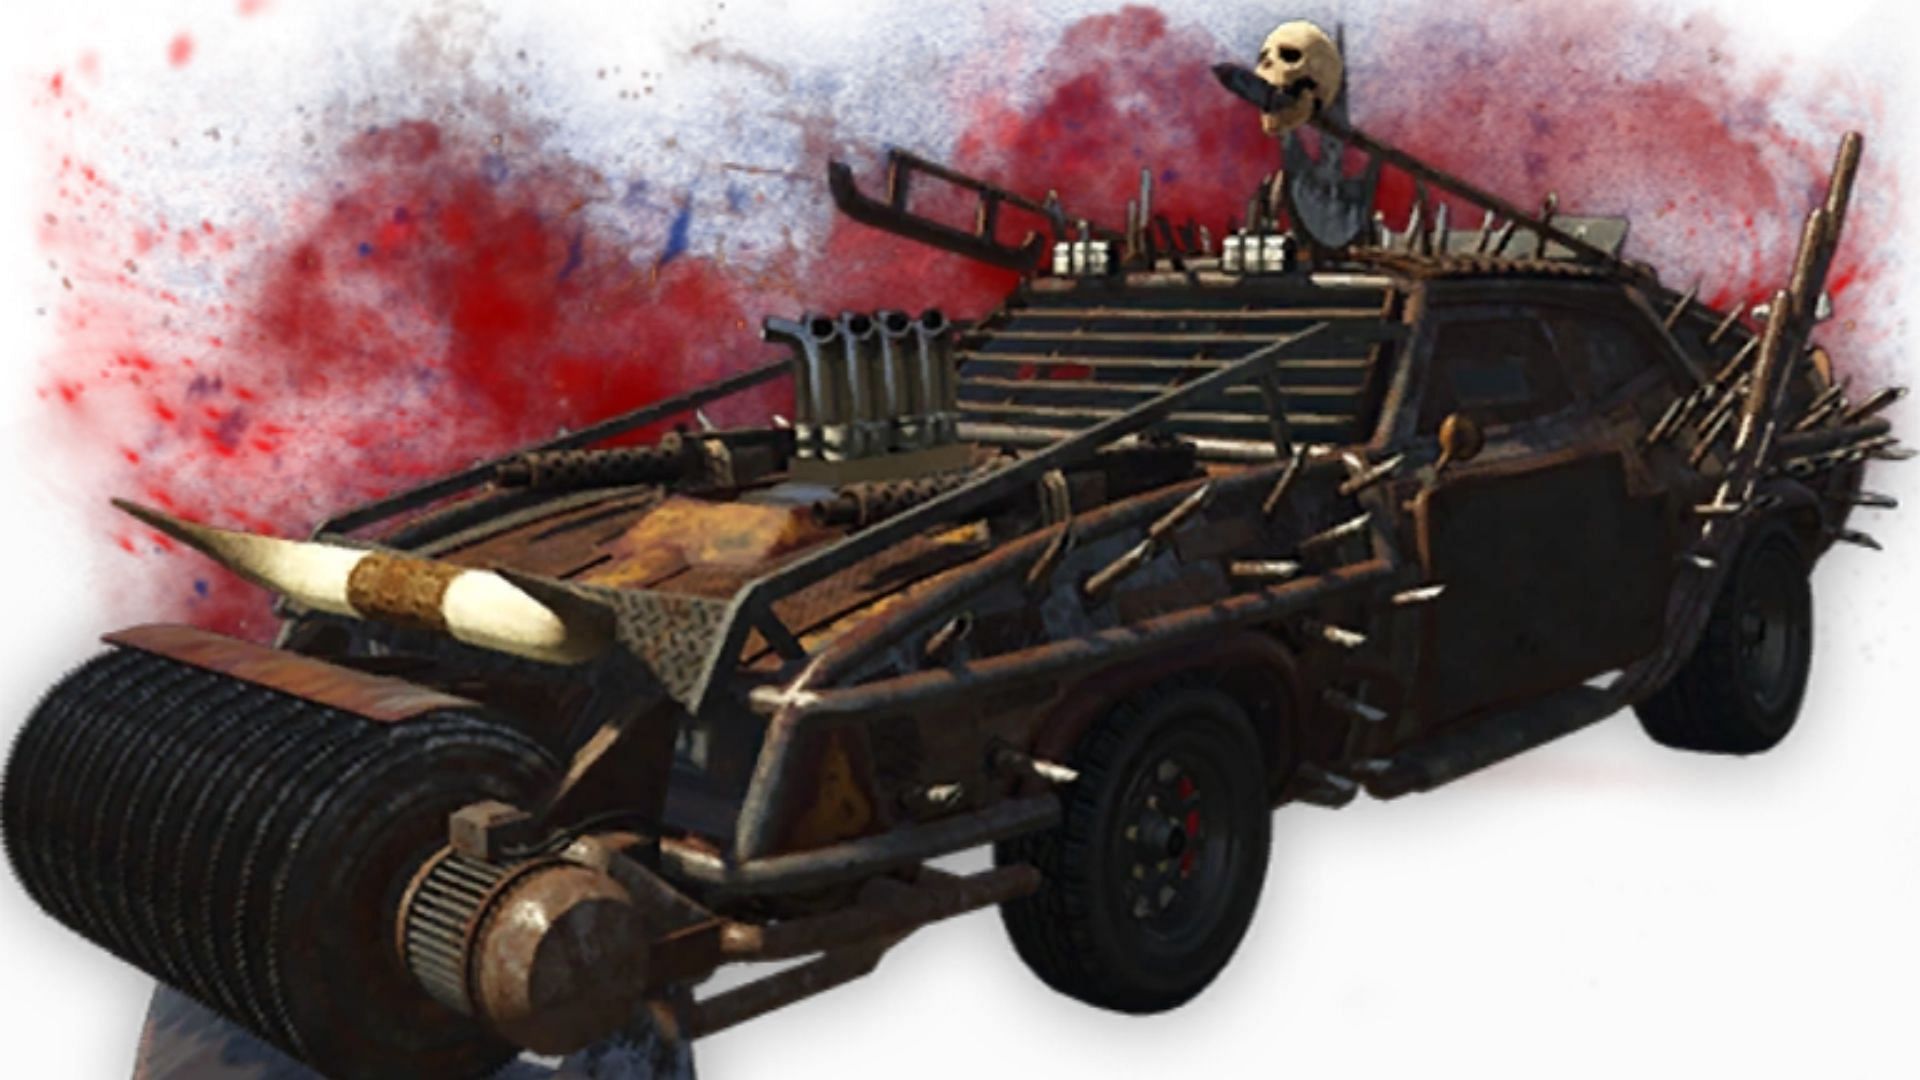 A fully upgraded Vapid Imperator (Arena) in Grand Theft Auto Online. (Image via GTA Wiki)